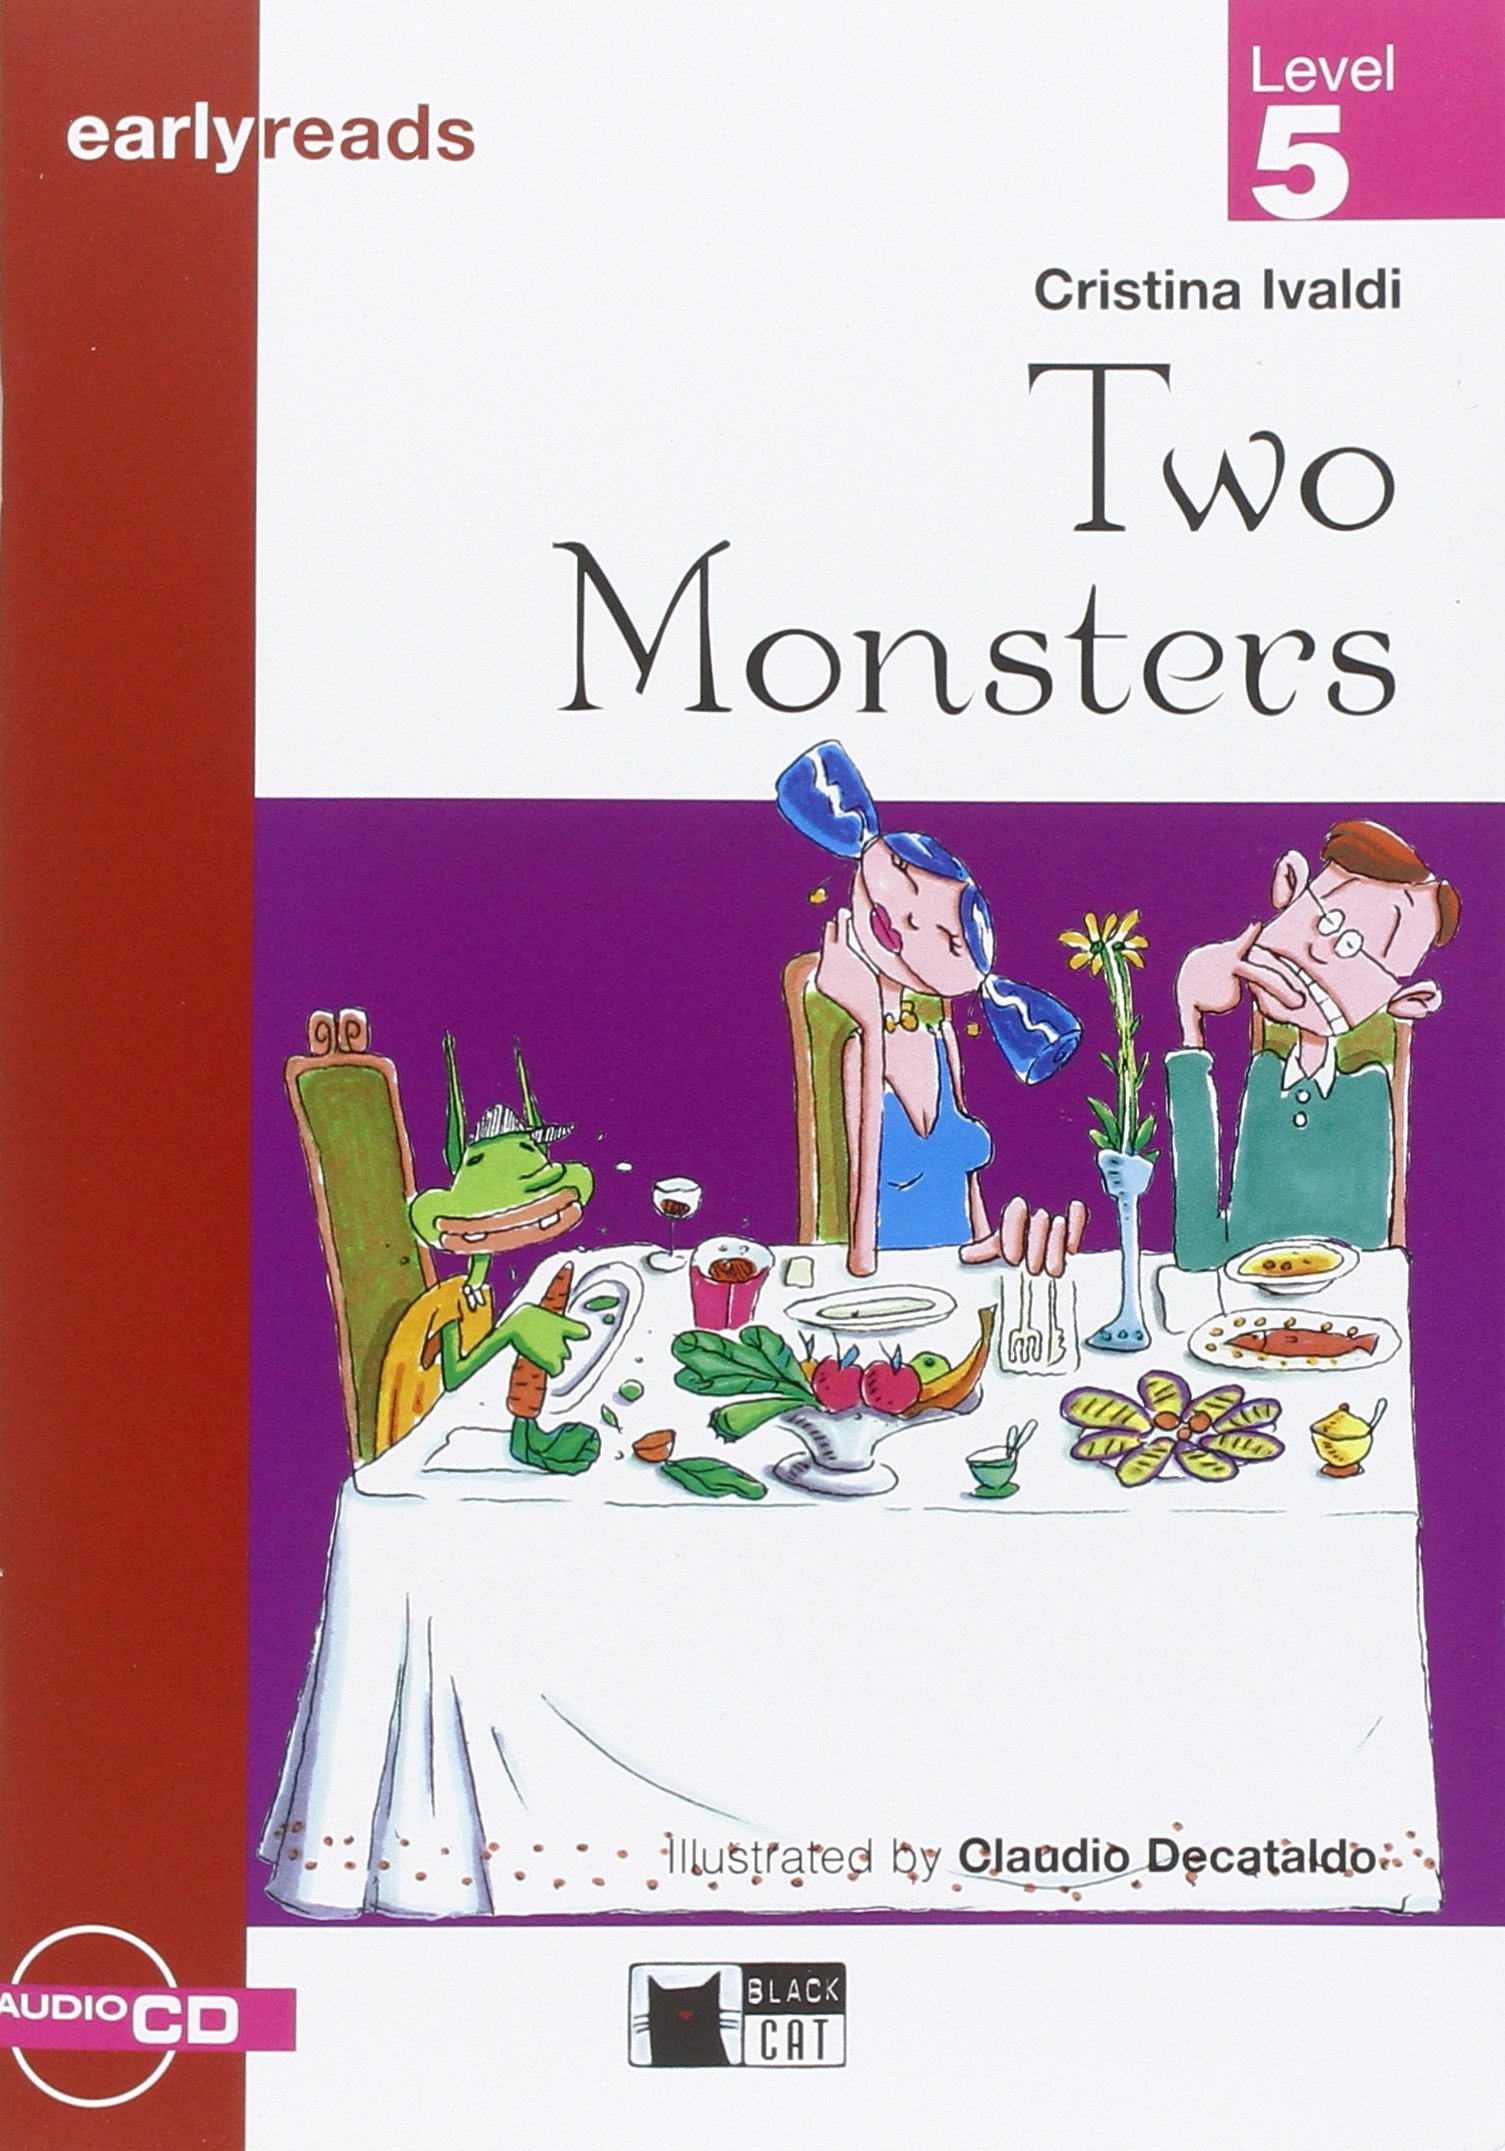 Two Monsters (Level 5)